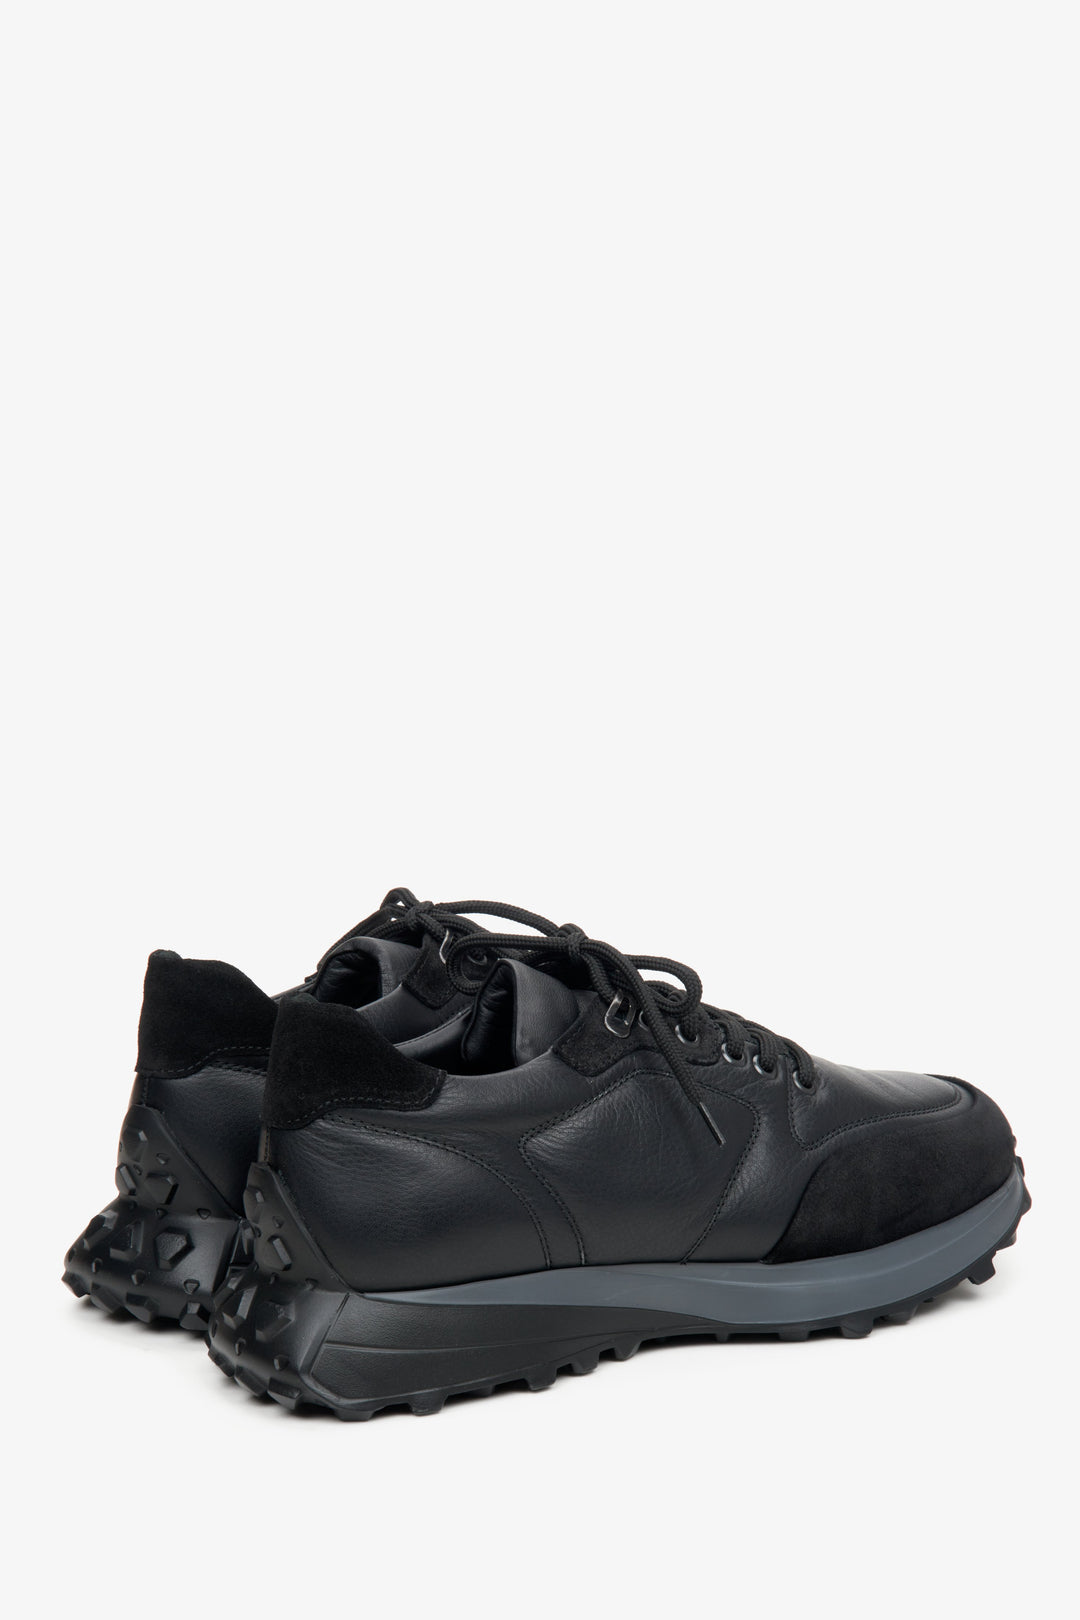 Men's black athletic sneakers with suede and leather by Estro - close-up on the side seam and heel.